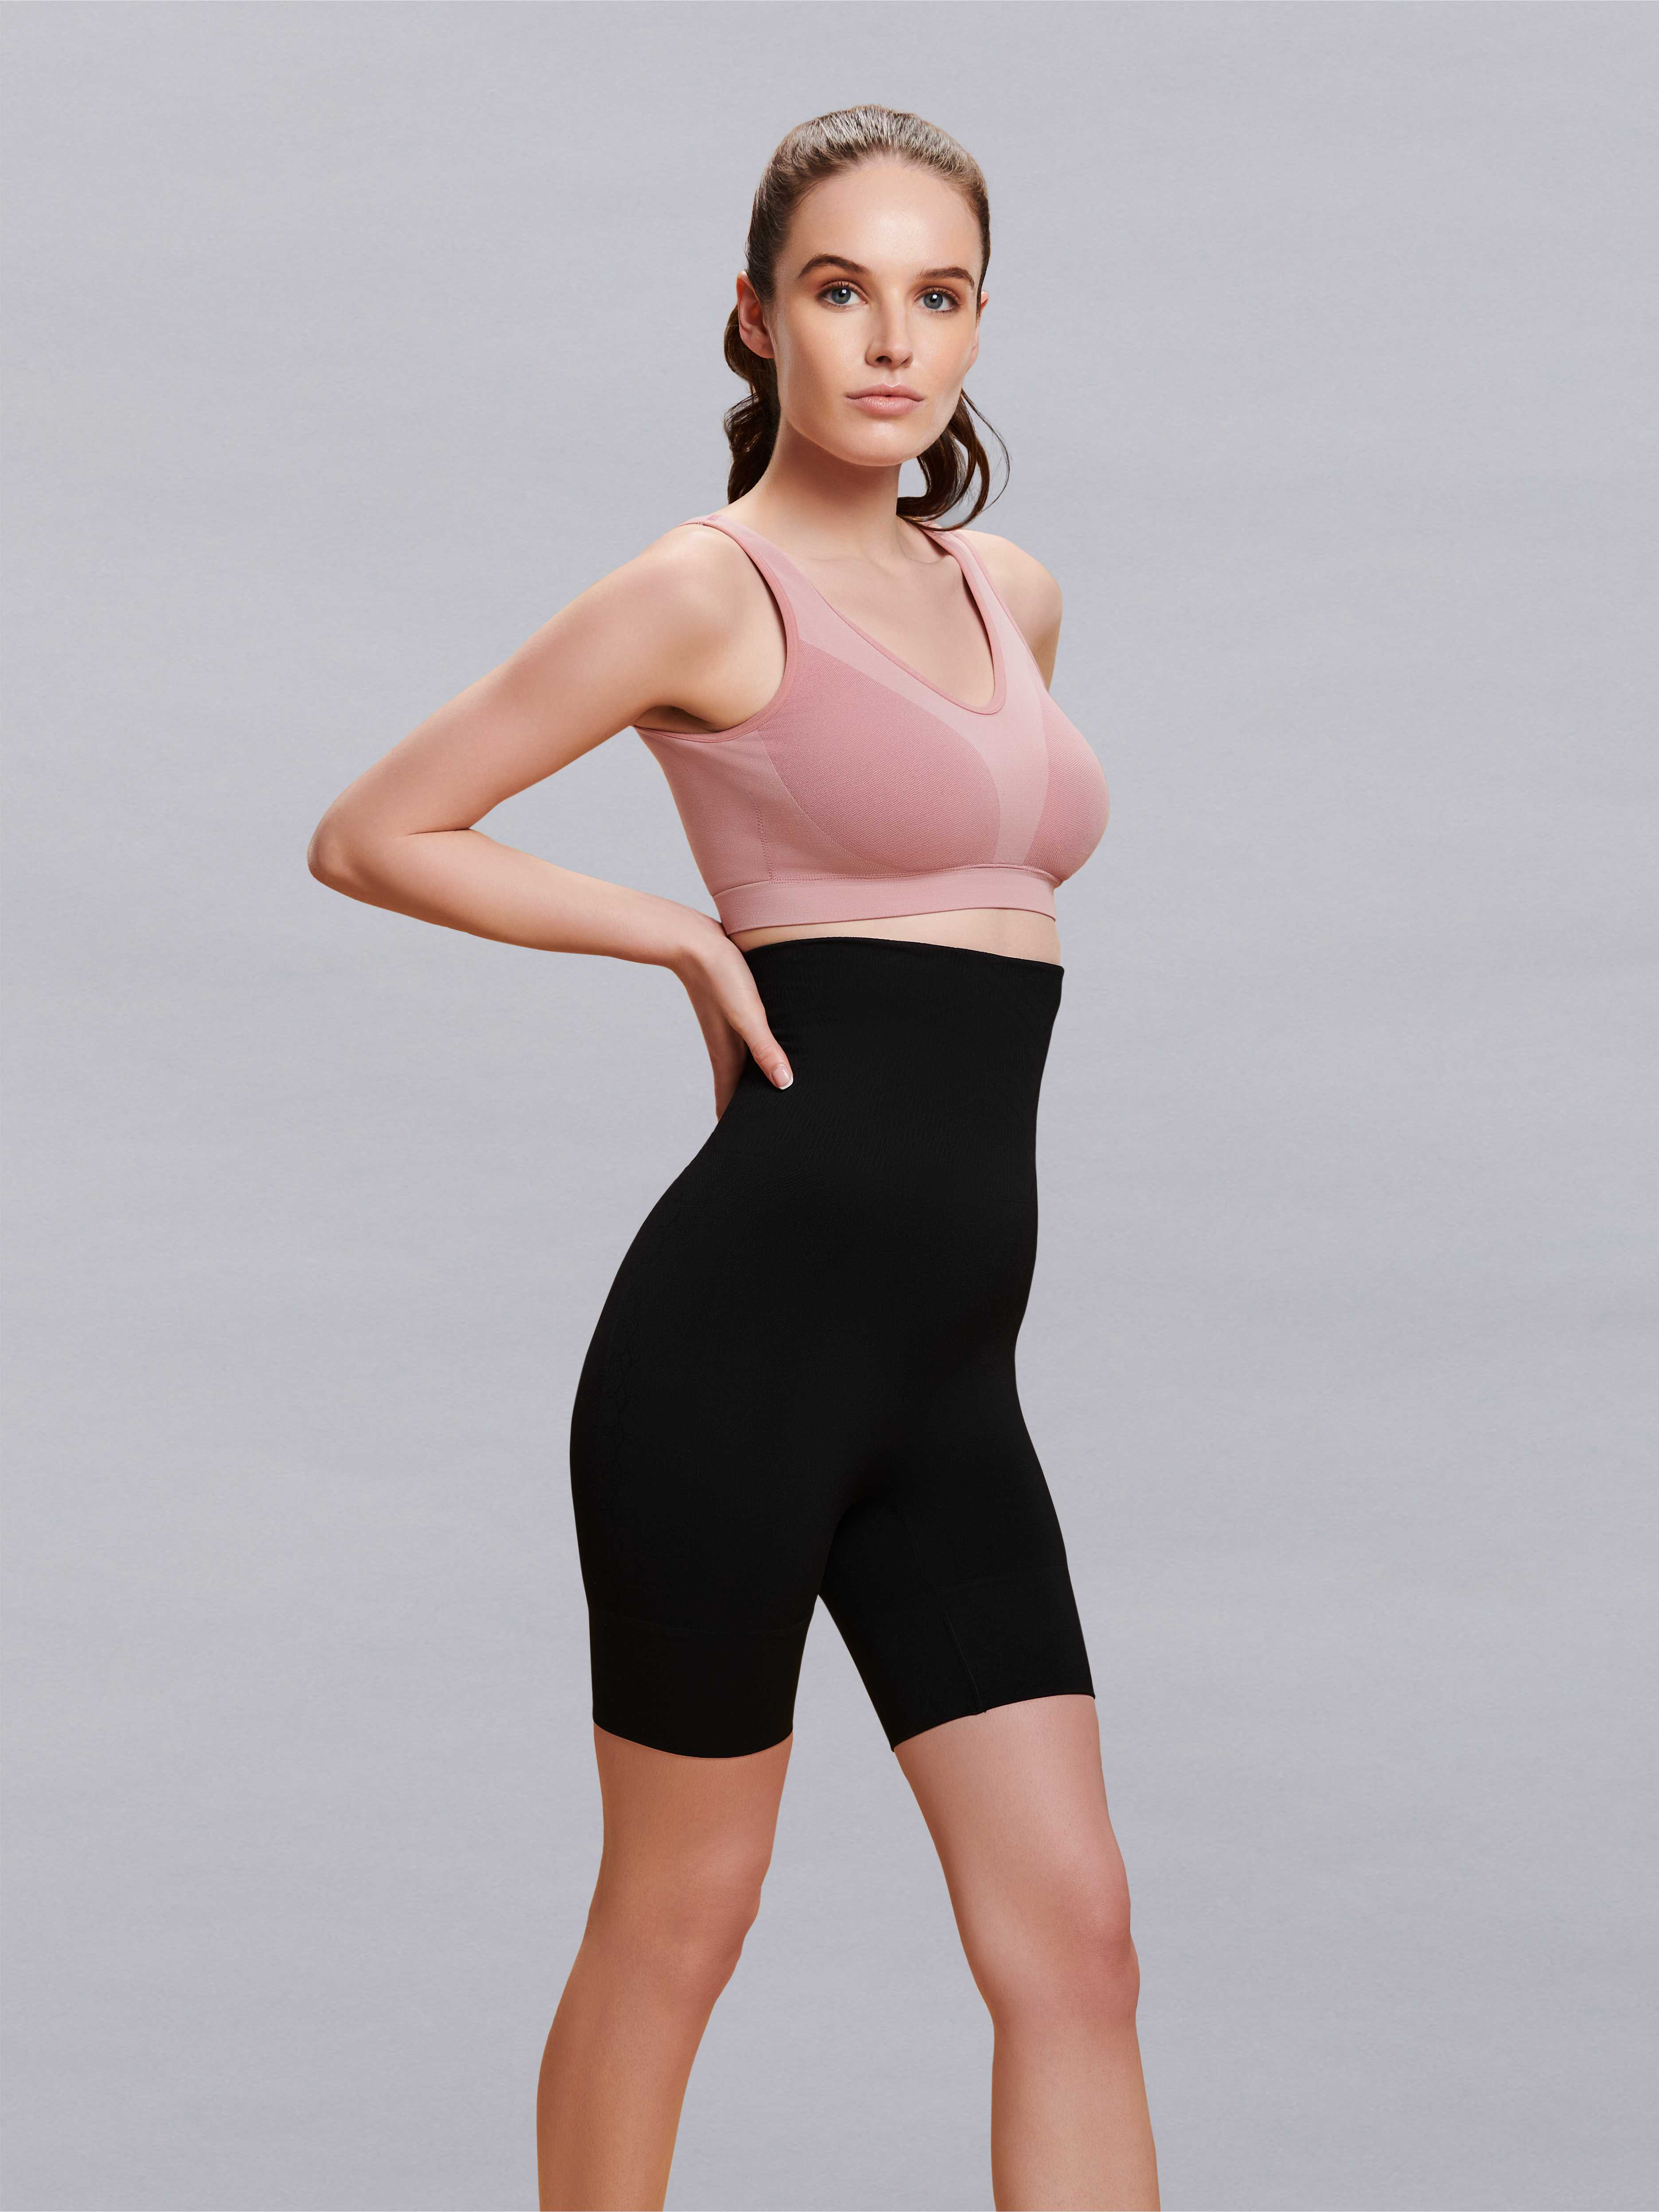 Perfect Curves Start Here: Best-Selling High-Quality Shapewear!#curlad, shape wear